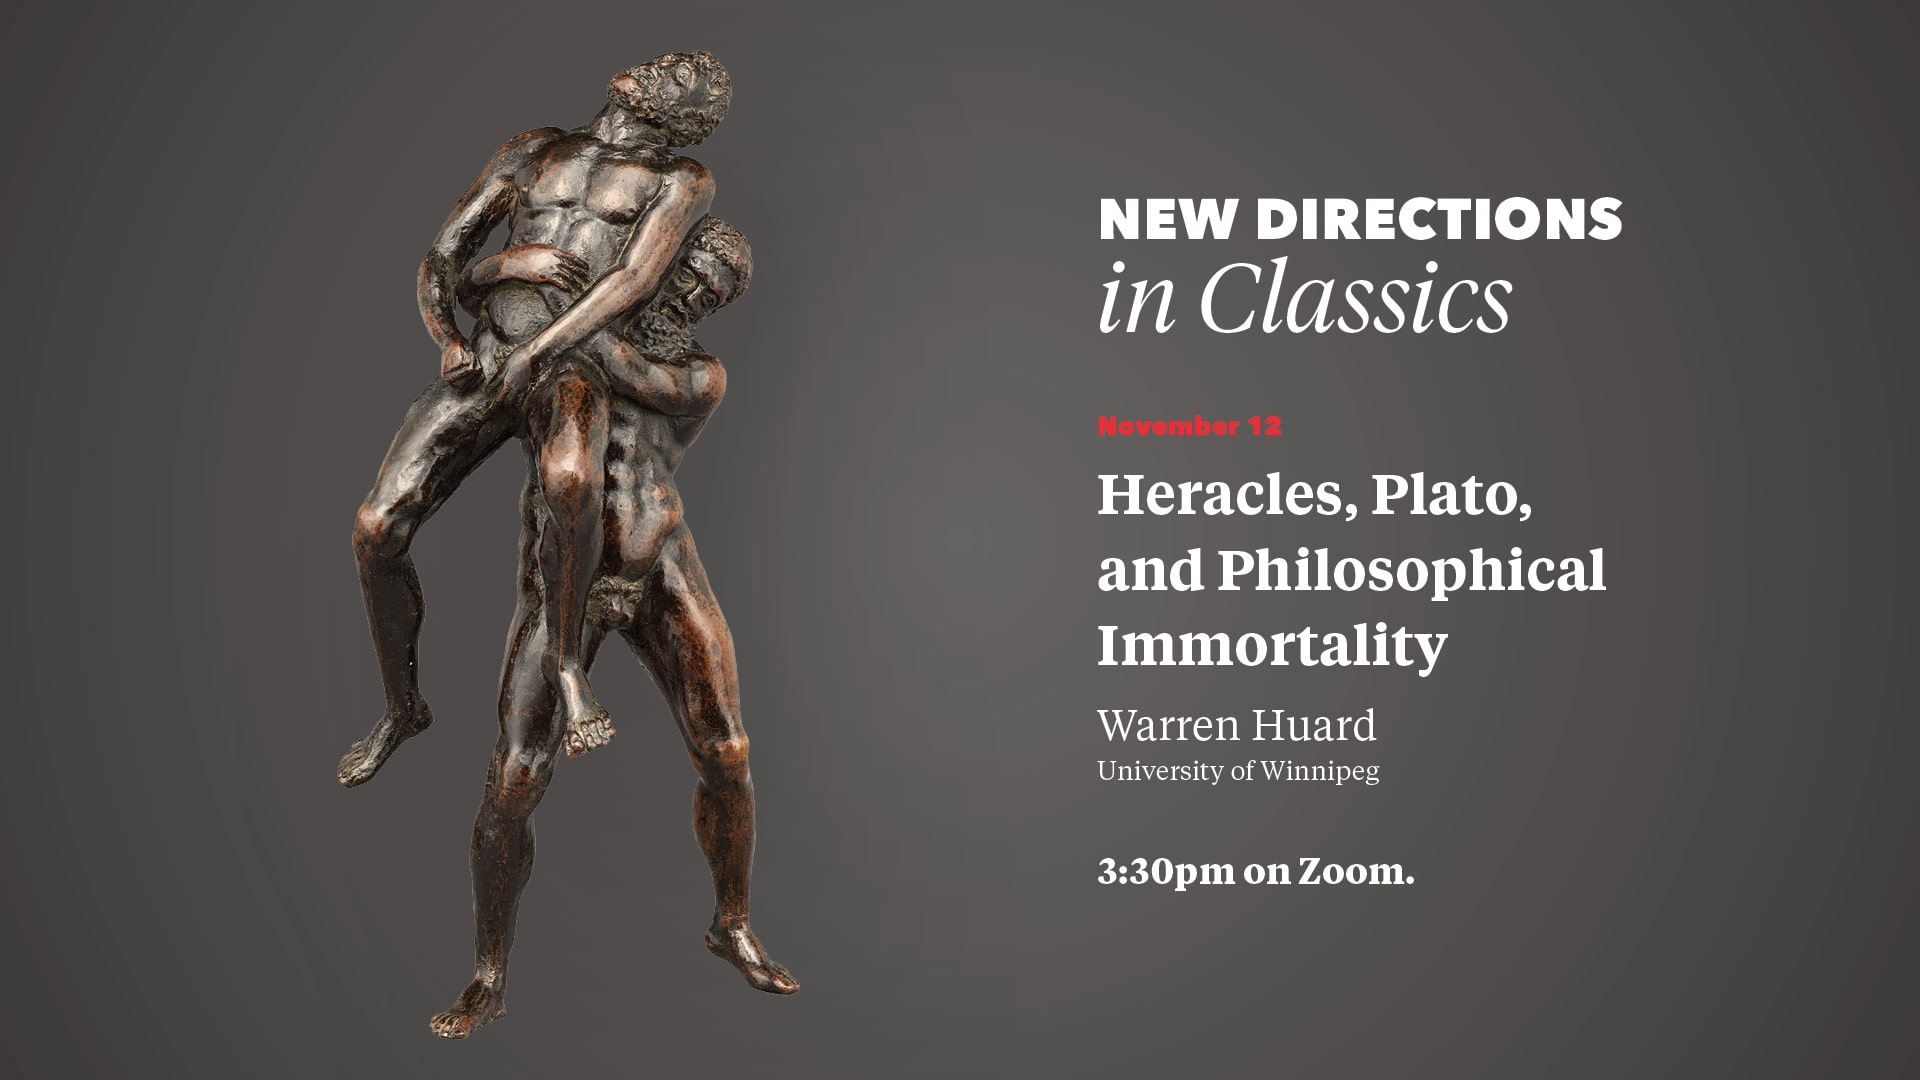 Promo image for Noc 12 New Directions in Classics talk; full text on web page